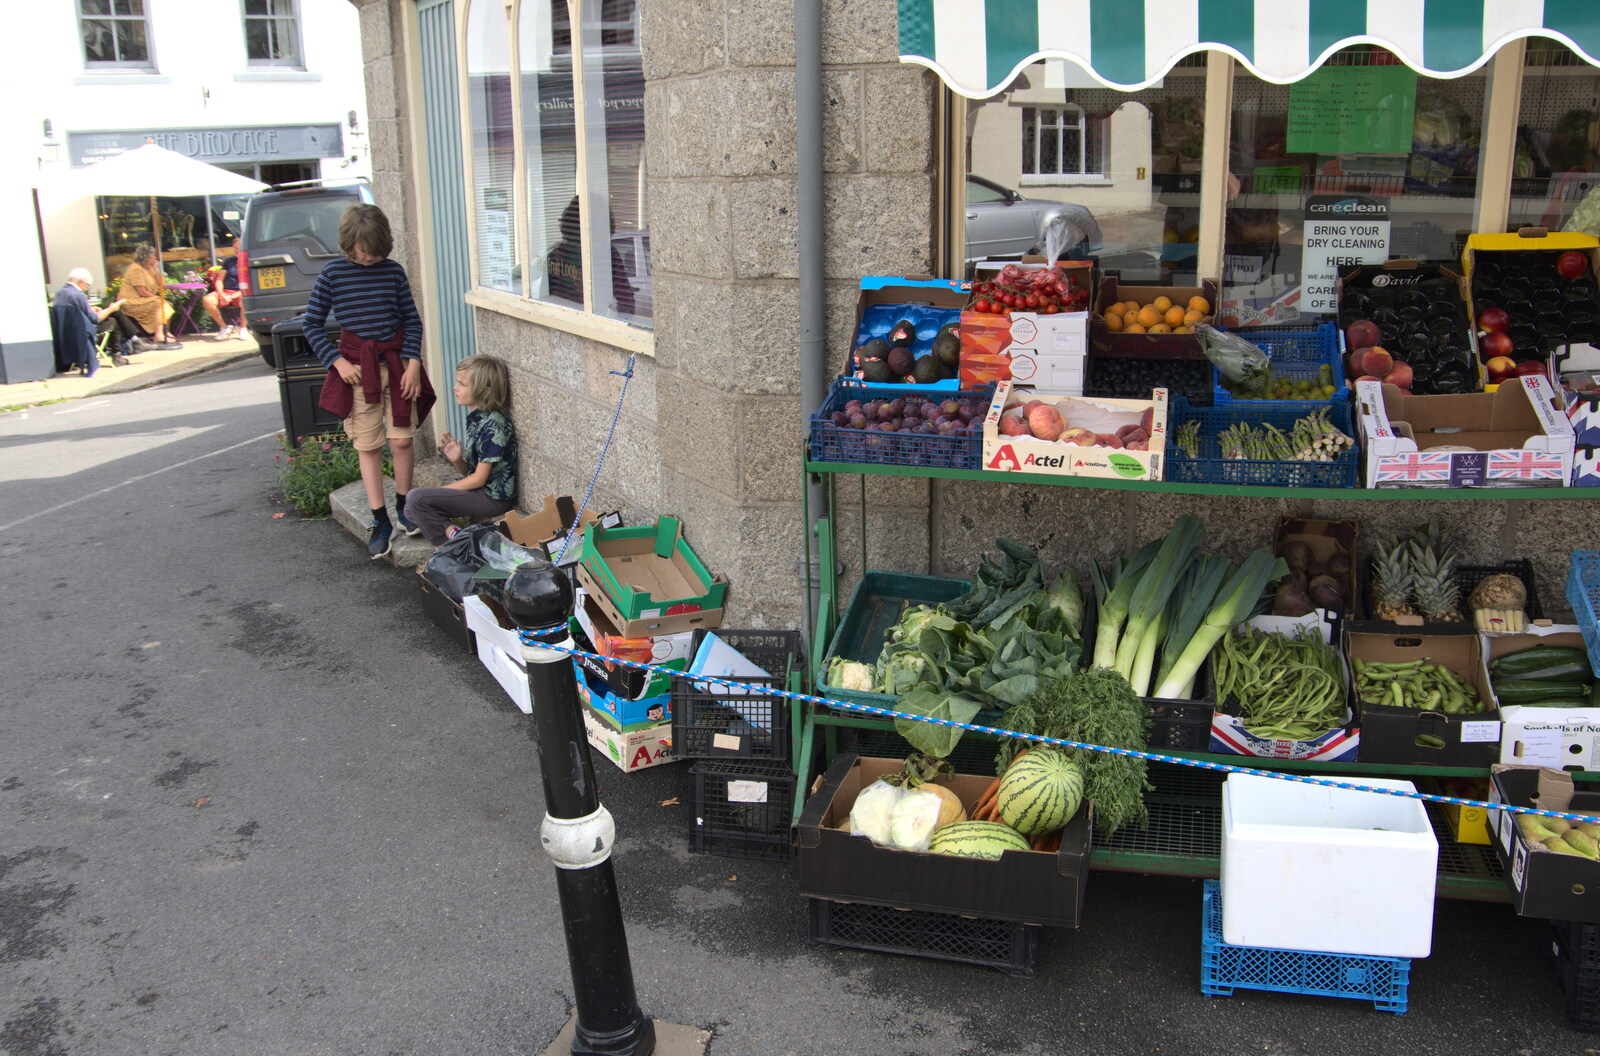 Fruit and vegetables from A Game of Cricket, and a Walk Around Chagford, Devon - 23rd August 2020